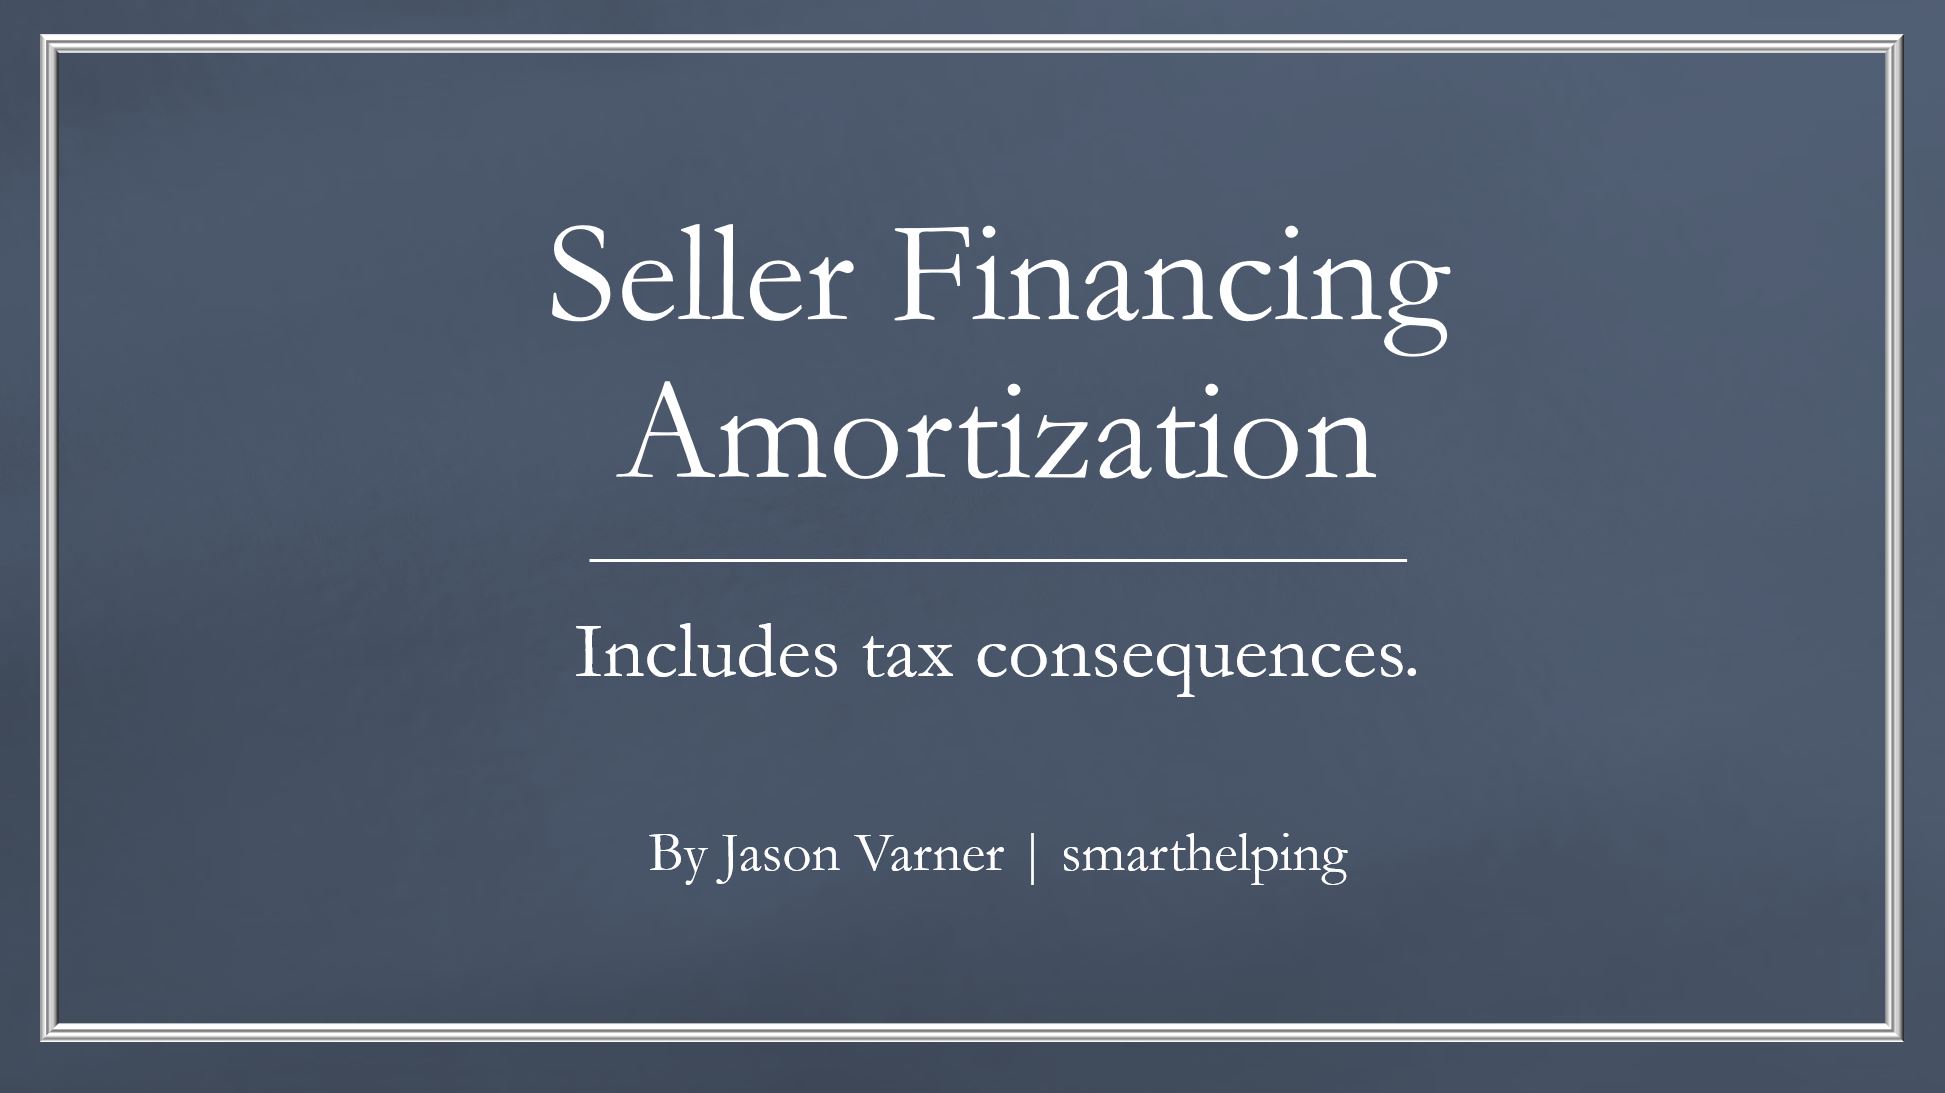 Seller Financing Amortization Schedule with Tax Logic